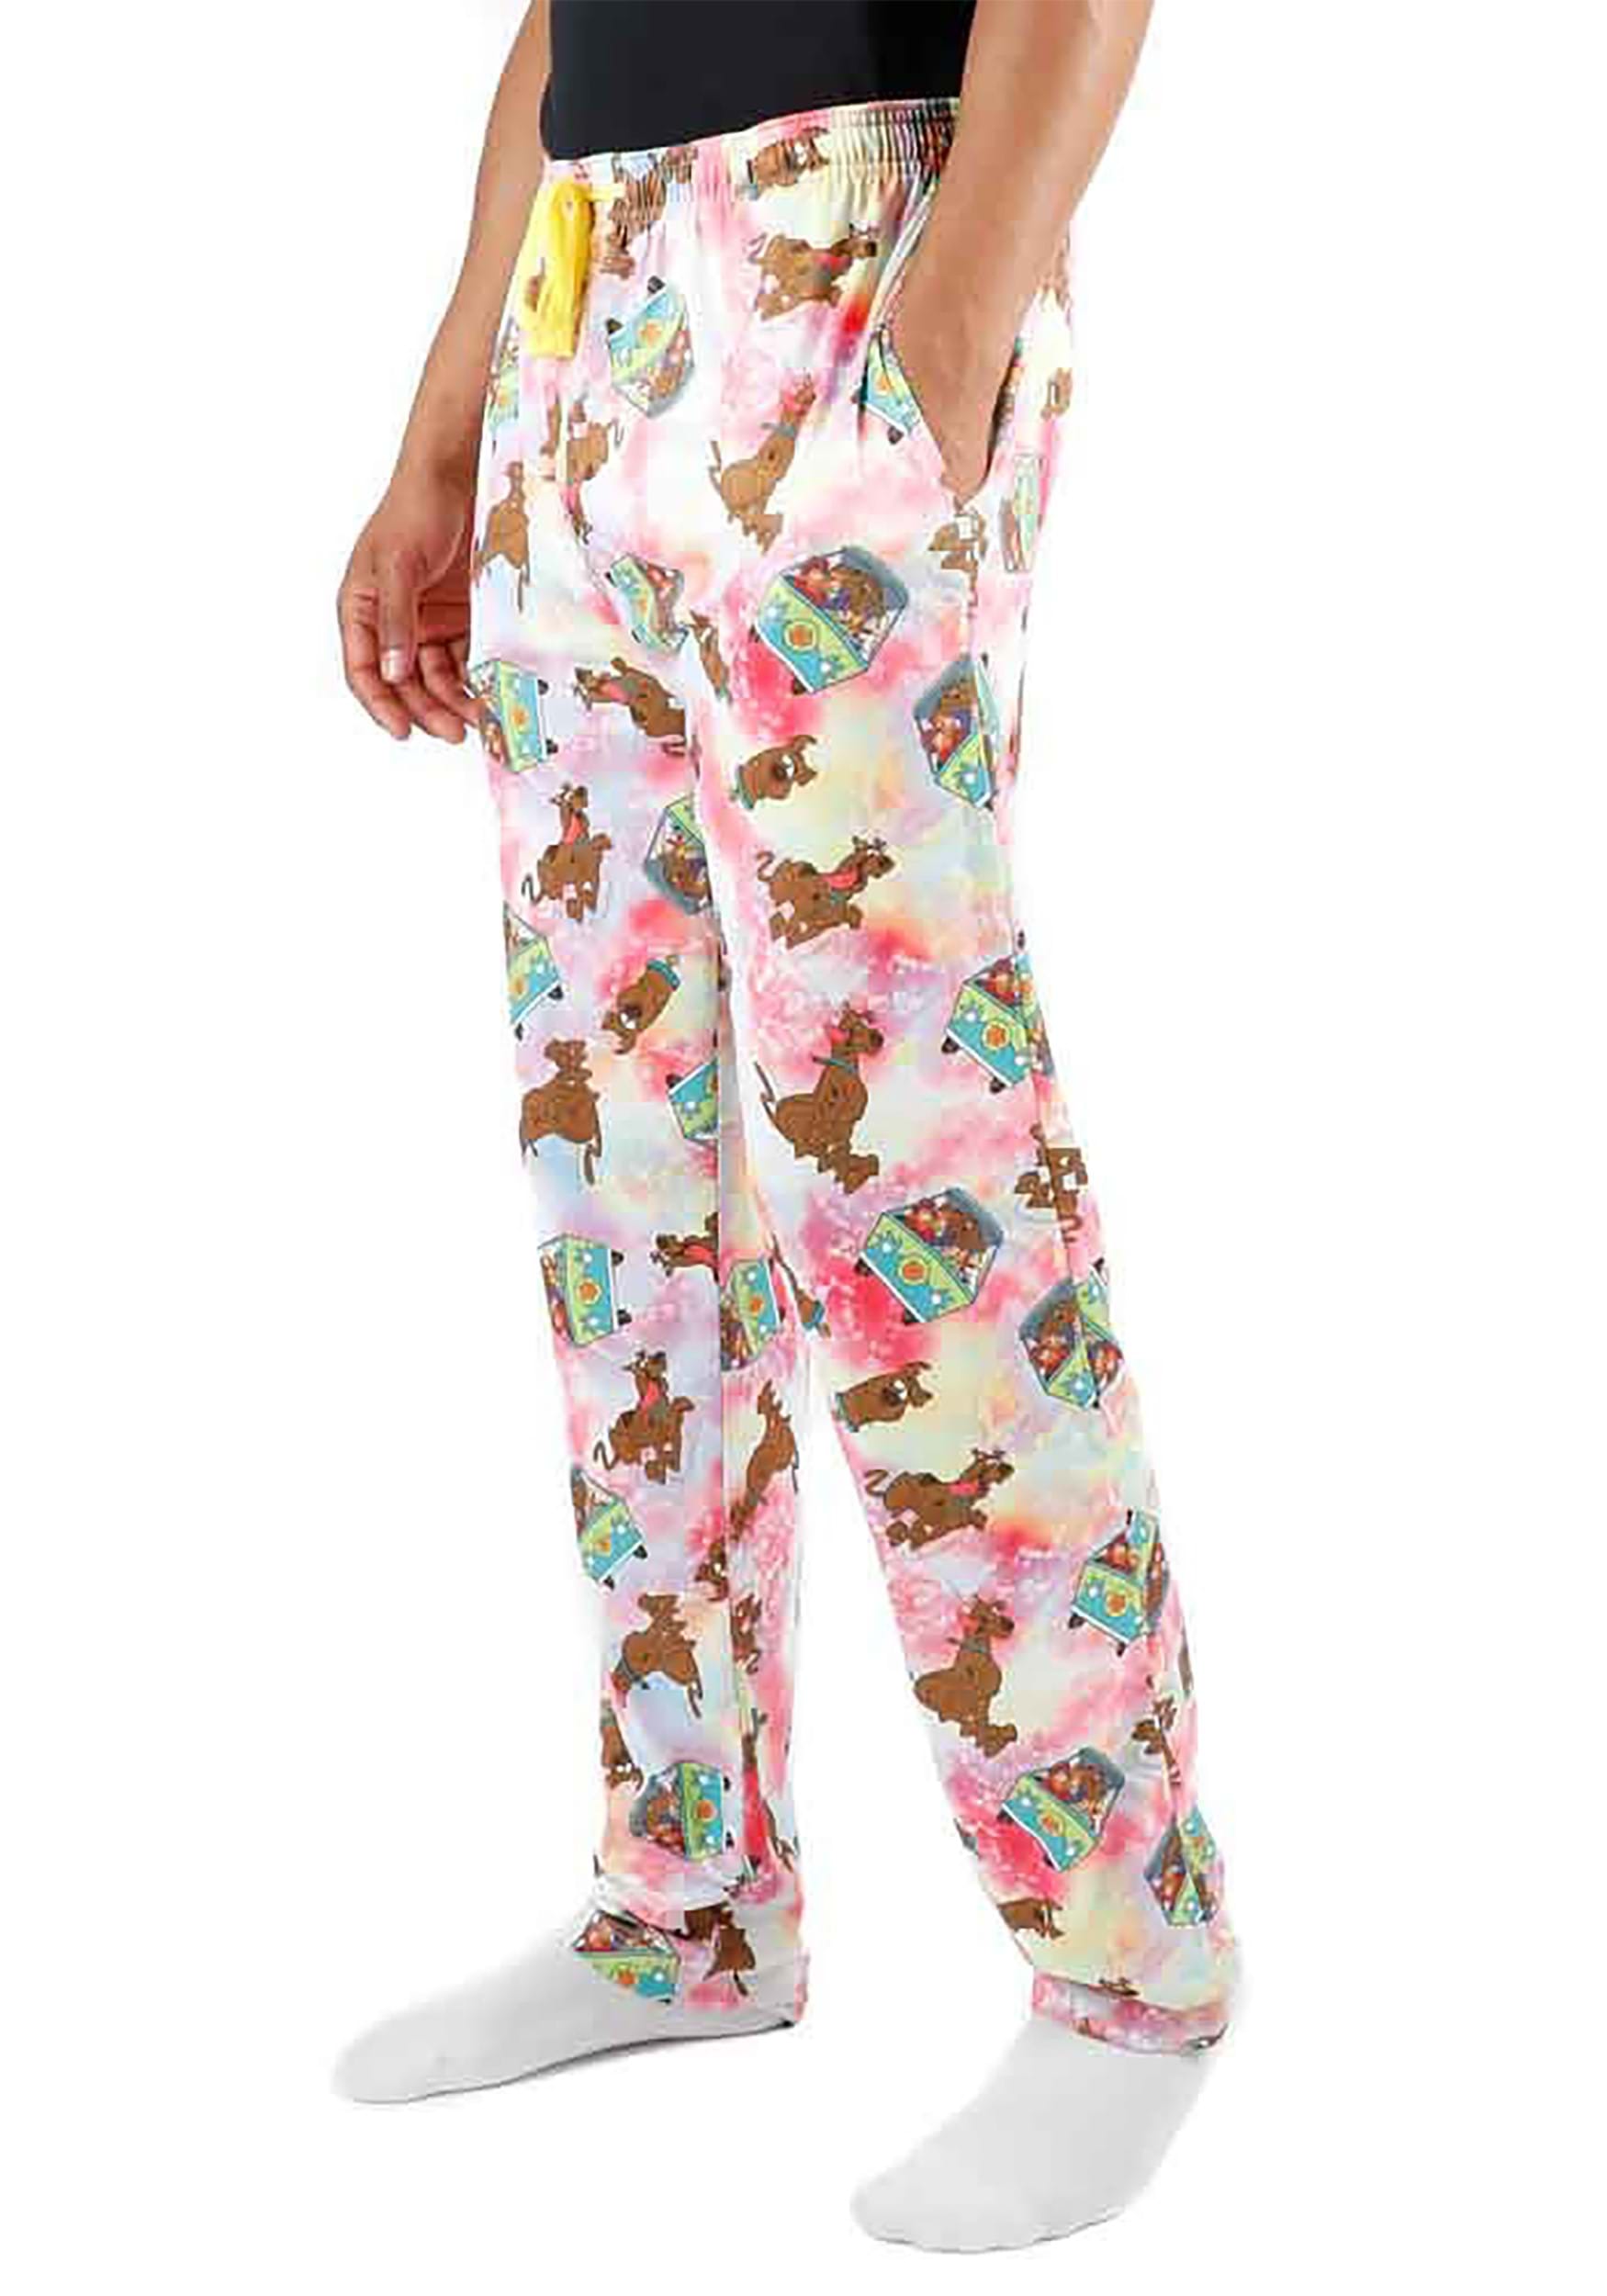 Adult Women's Scooby Doo All Over Pink Tie Dye Plush Lounge Pants